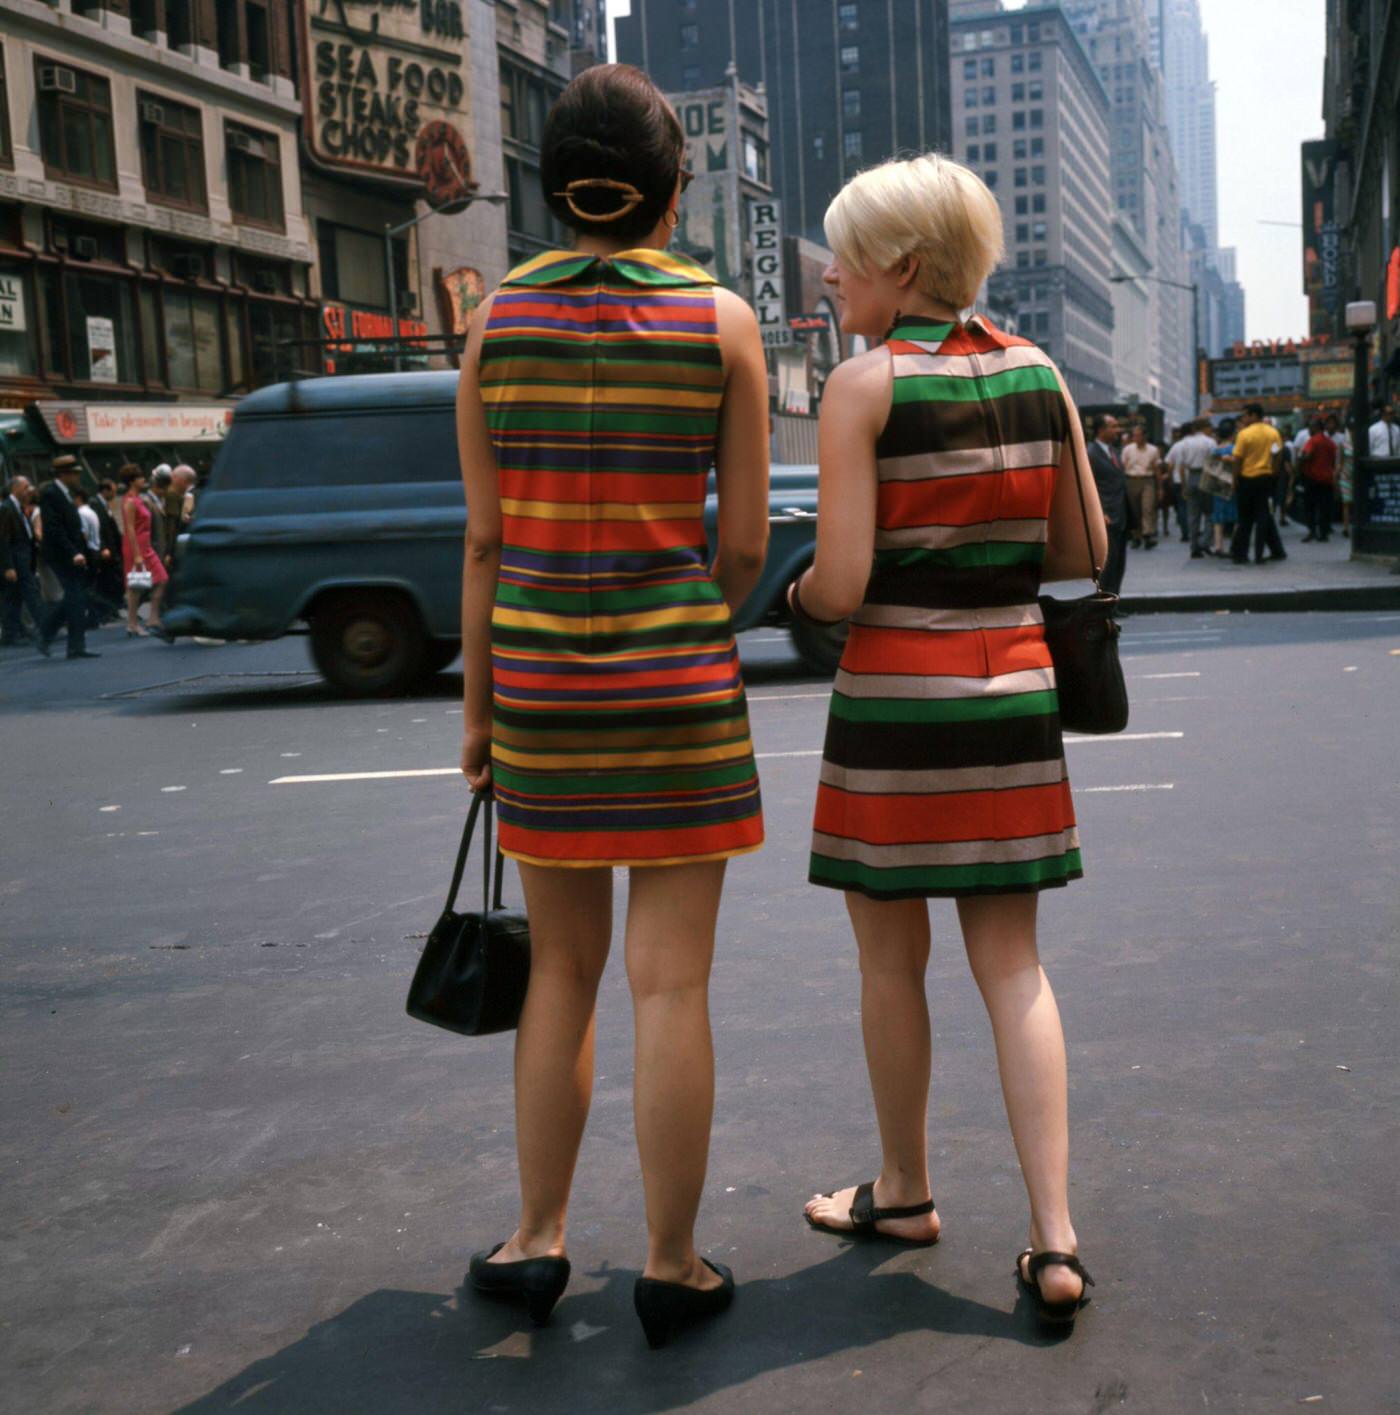 Girls Wearing Striped Dresses In Times Square, Manhattan, 1967